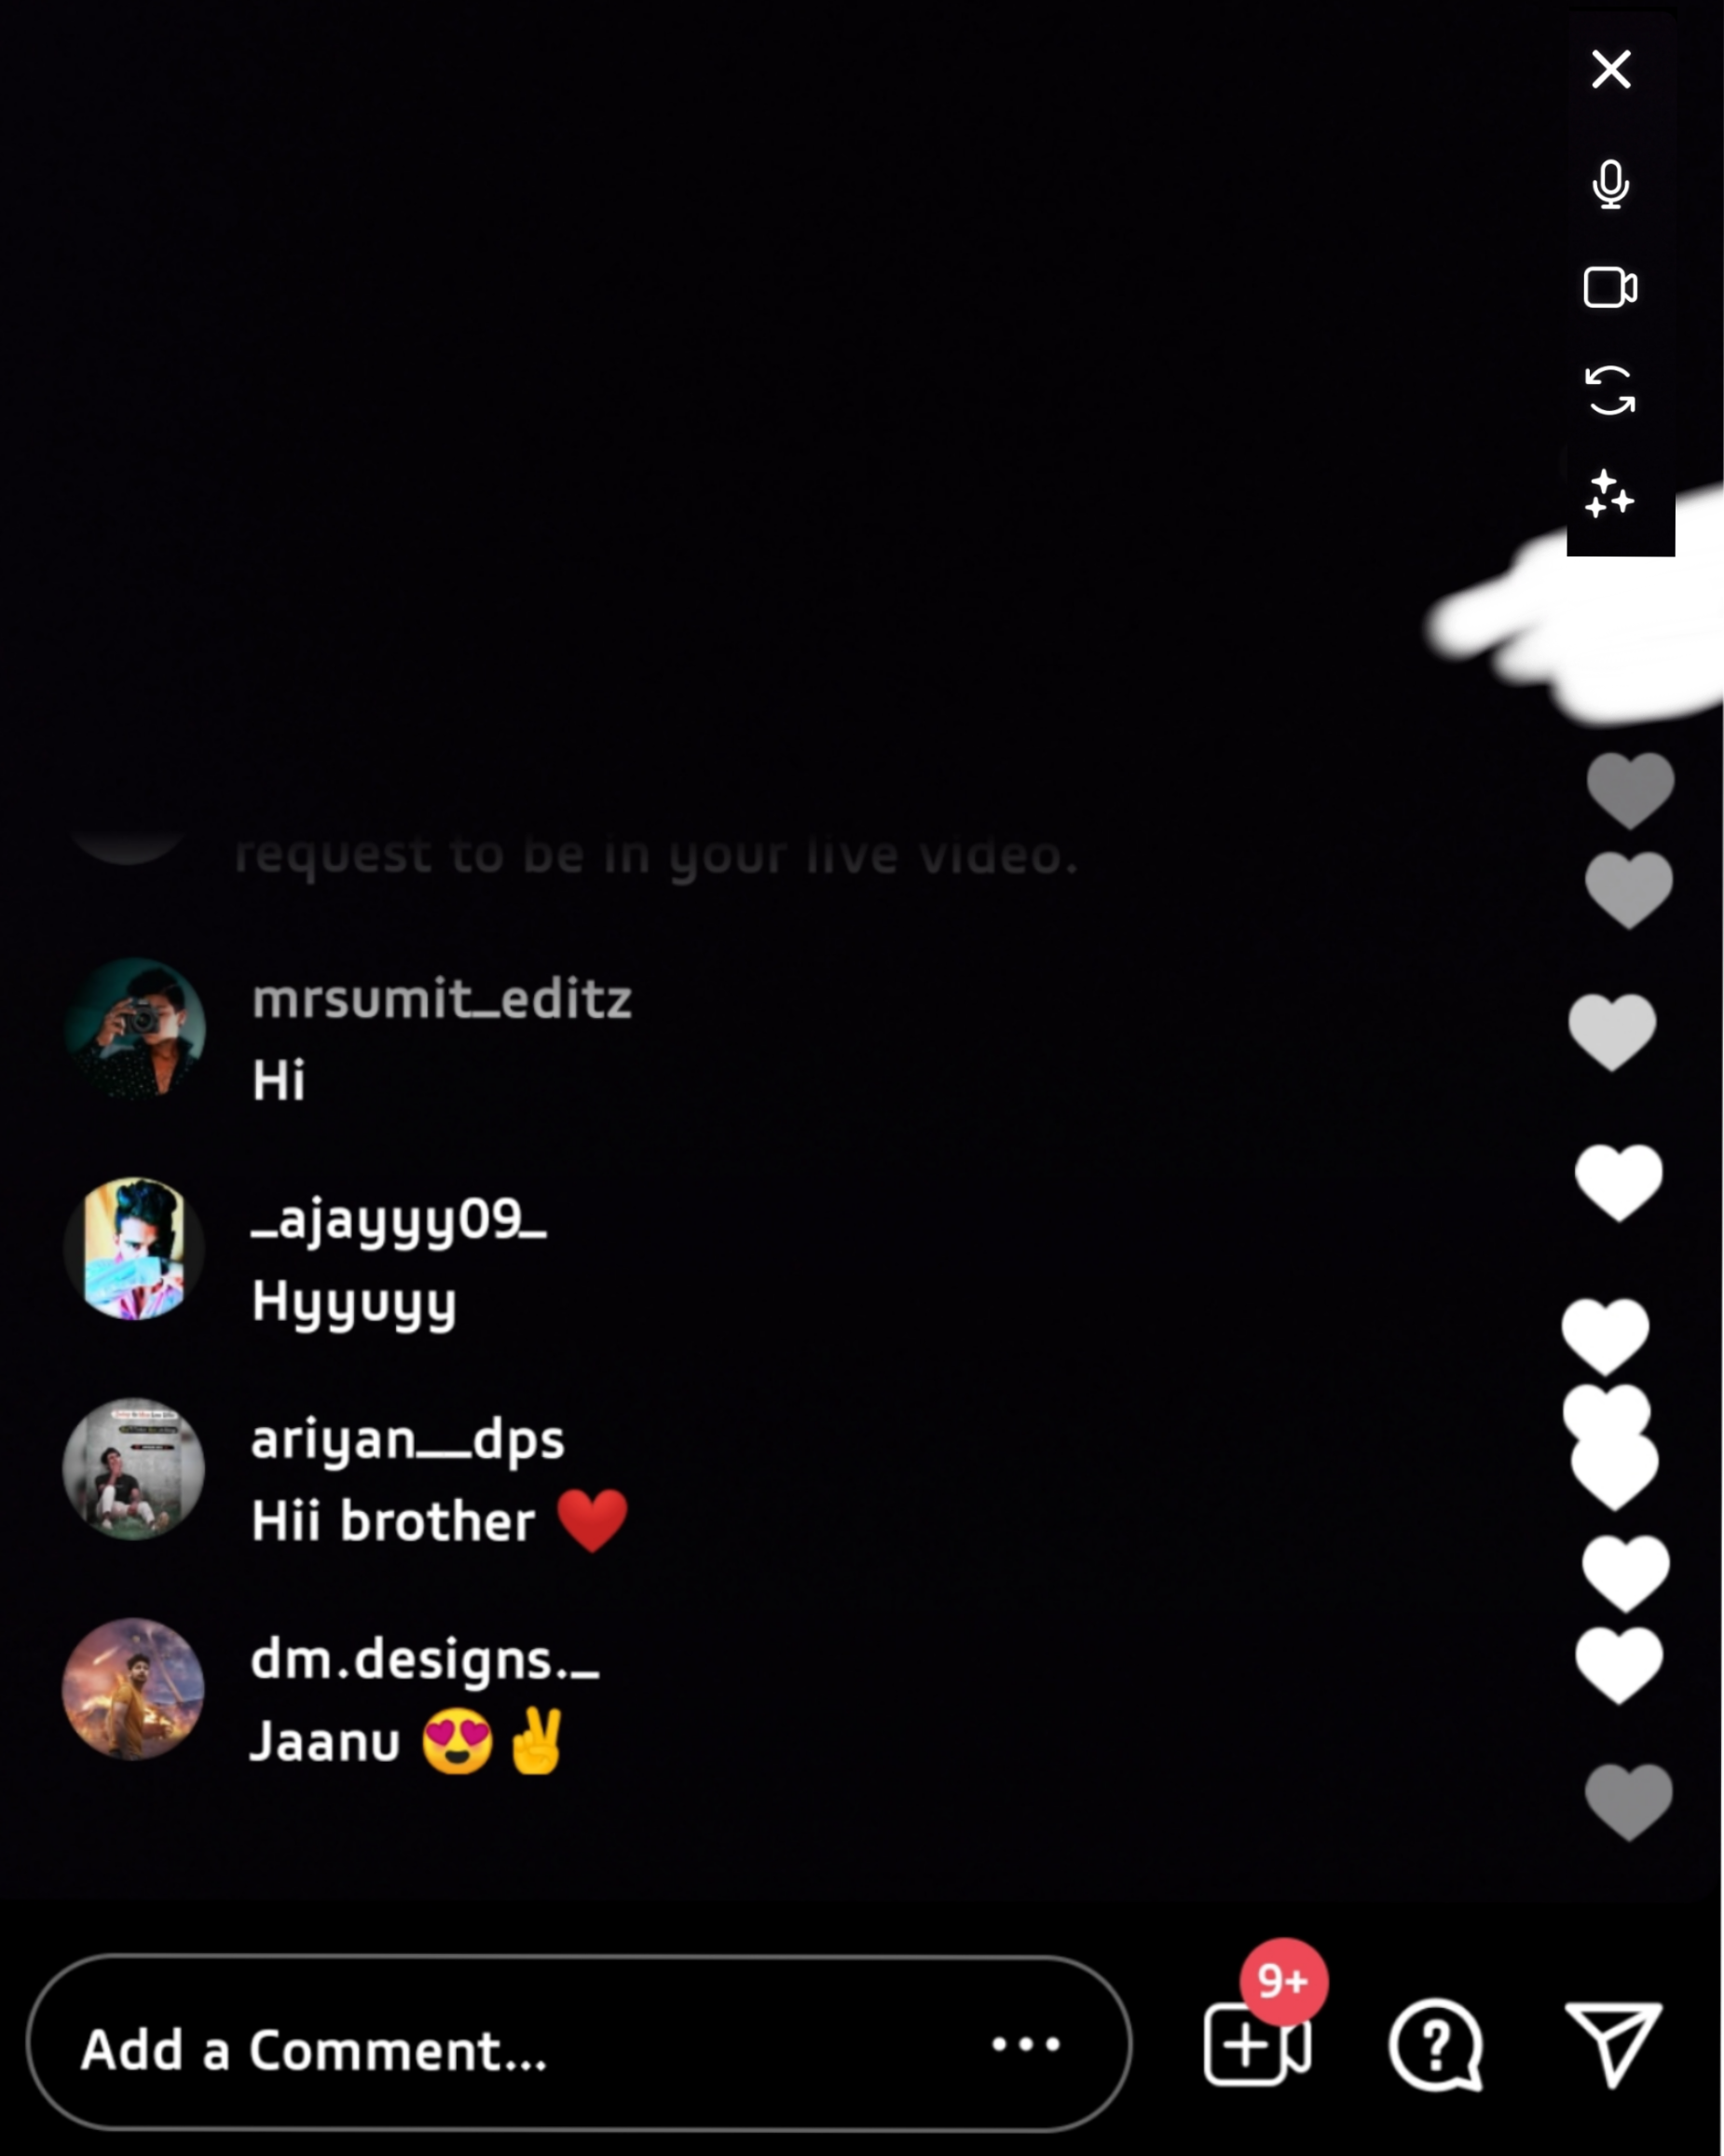 Instagram live Chat Background & PNG Download - DJ PHOTO EDITING